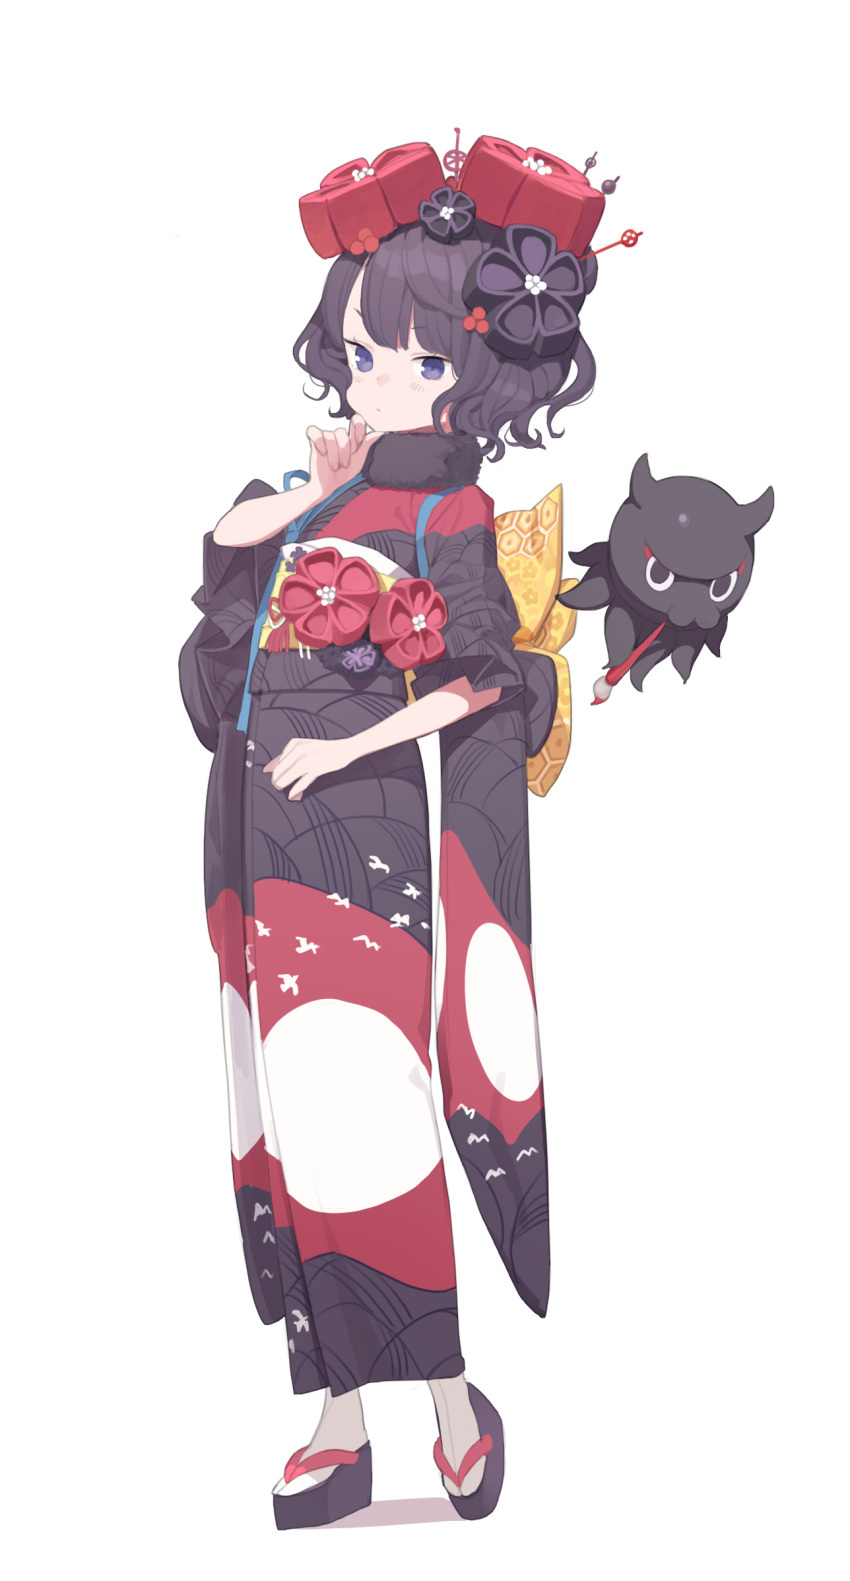 1girl bangs black_footwear black_hair black_kimono blush bow closed_mouth commentary_request doremi eyebrows_visible_through_hair fate/grand_order fate_(series) fur_collar hair_ornament highres horns japanese_clothes katsushika_hokusai_(fate/grand_order) kimono long_sleeves octopus paintbrush print_kimono short_hair simple_background sleeves_pushed_up socks solo standing standing_on_one_leg tabi v-shaped_eyebrows violet_eyes white_background white_legwear wide_sleeves yellow_bow zouri